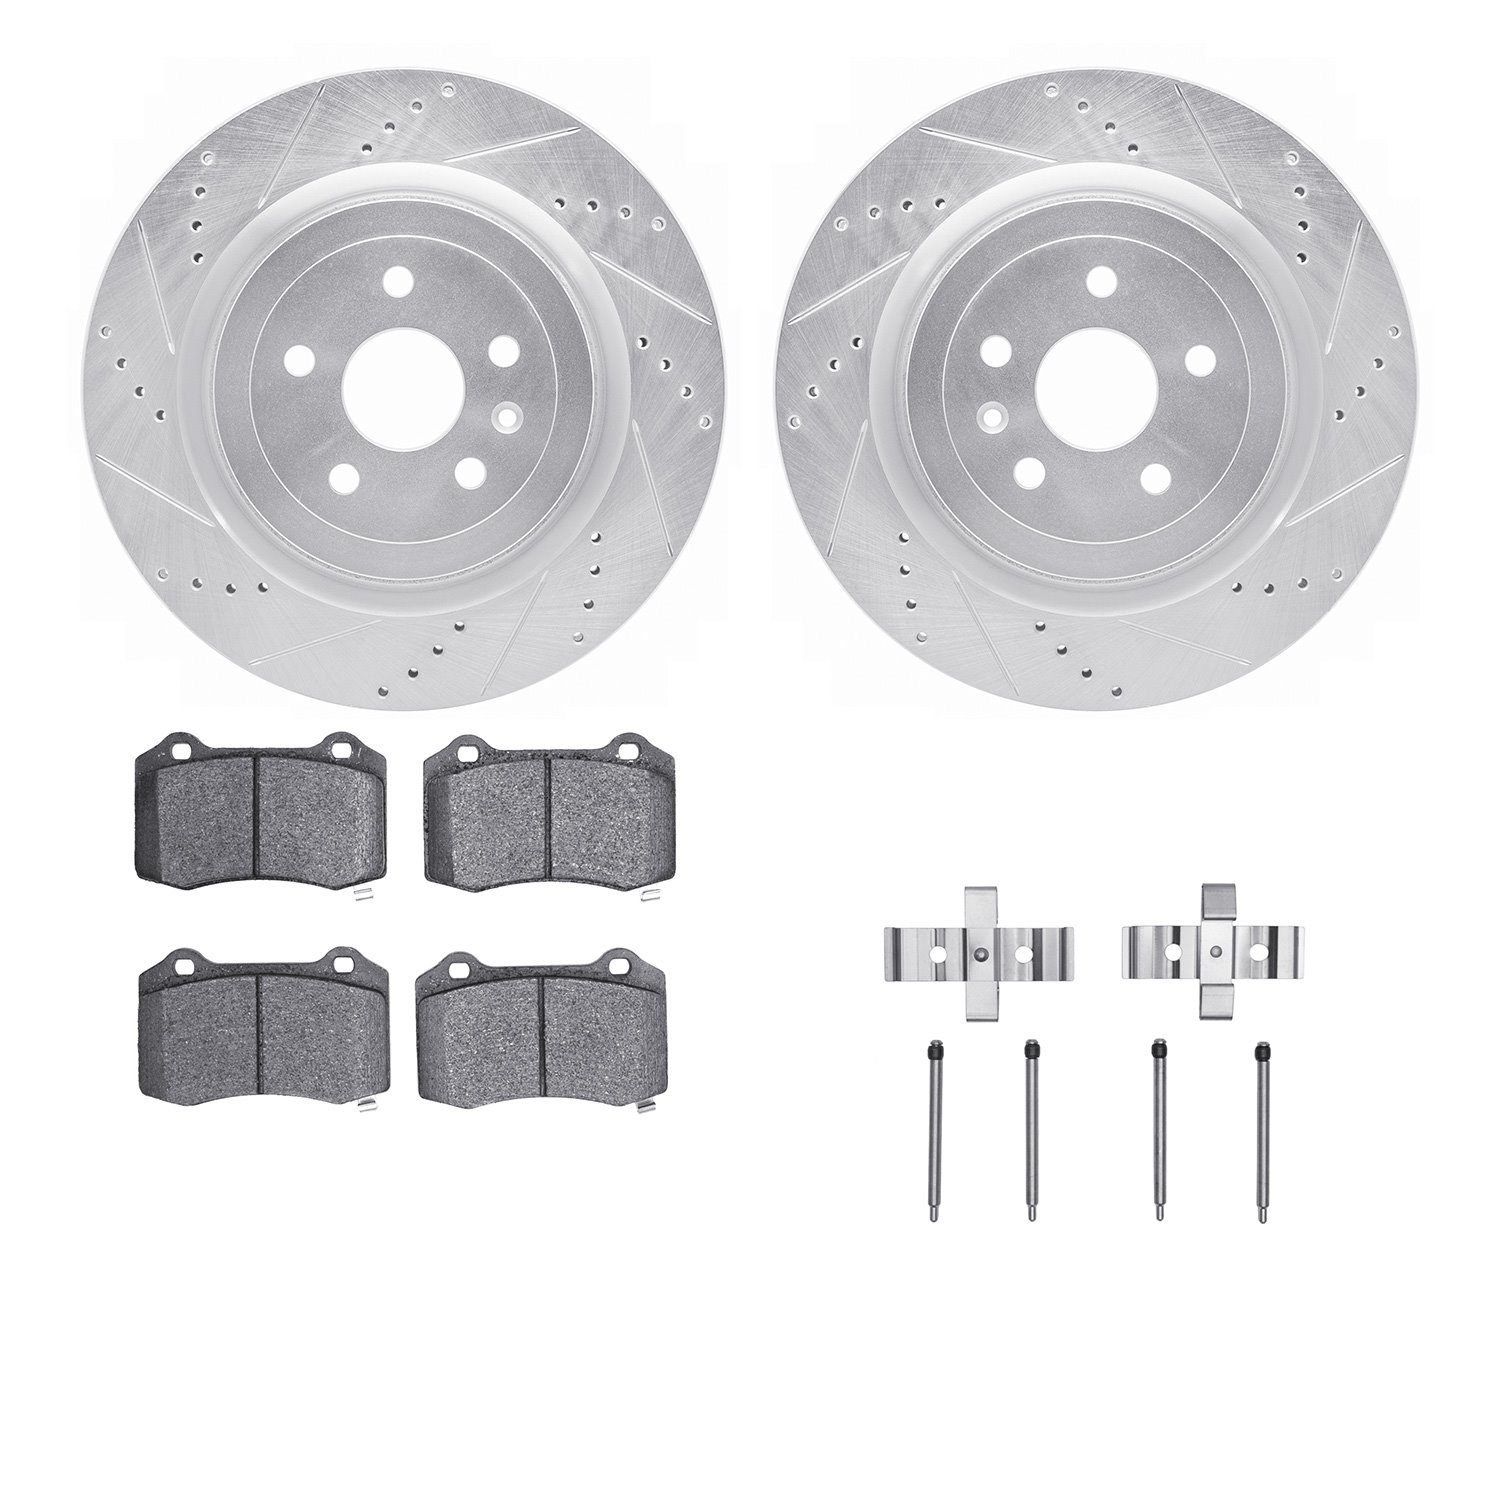 7412-47008 Drilled/Slotted Brake Rotors with Ultimate-Duty Brake Pads Kit & Hardware [Silver], Fits Select GM, Position: Rear